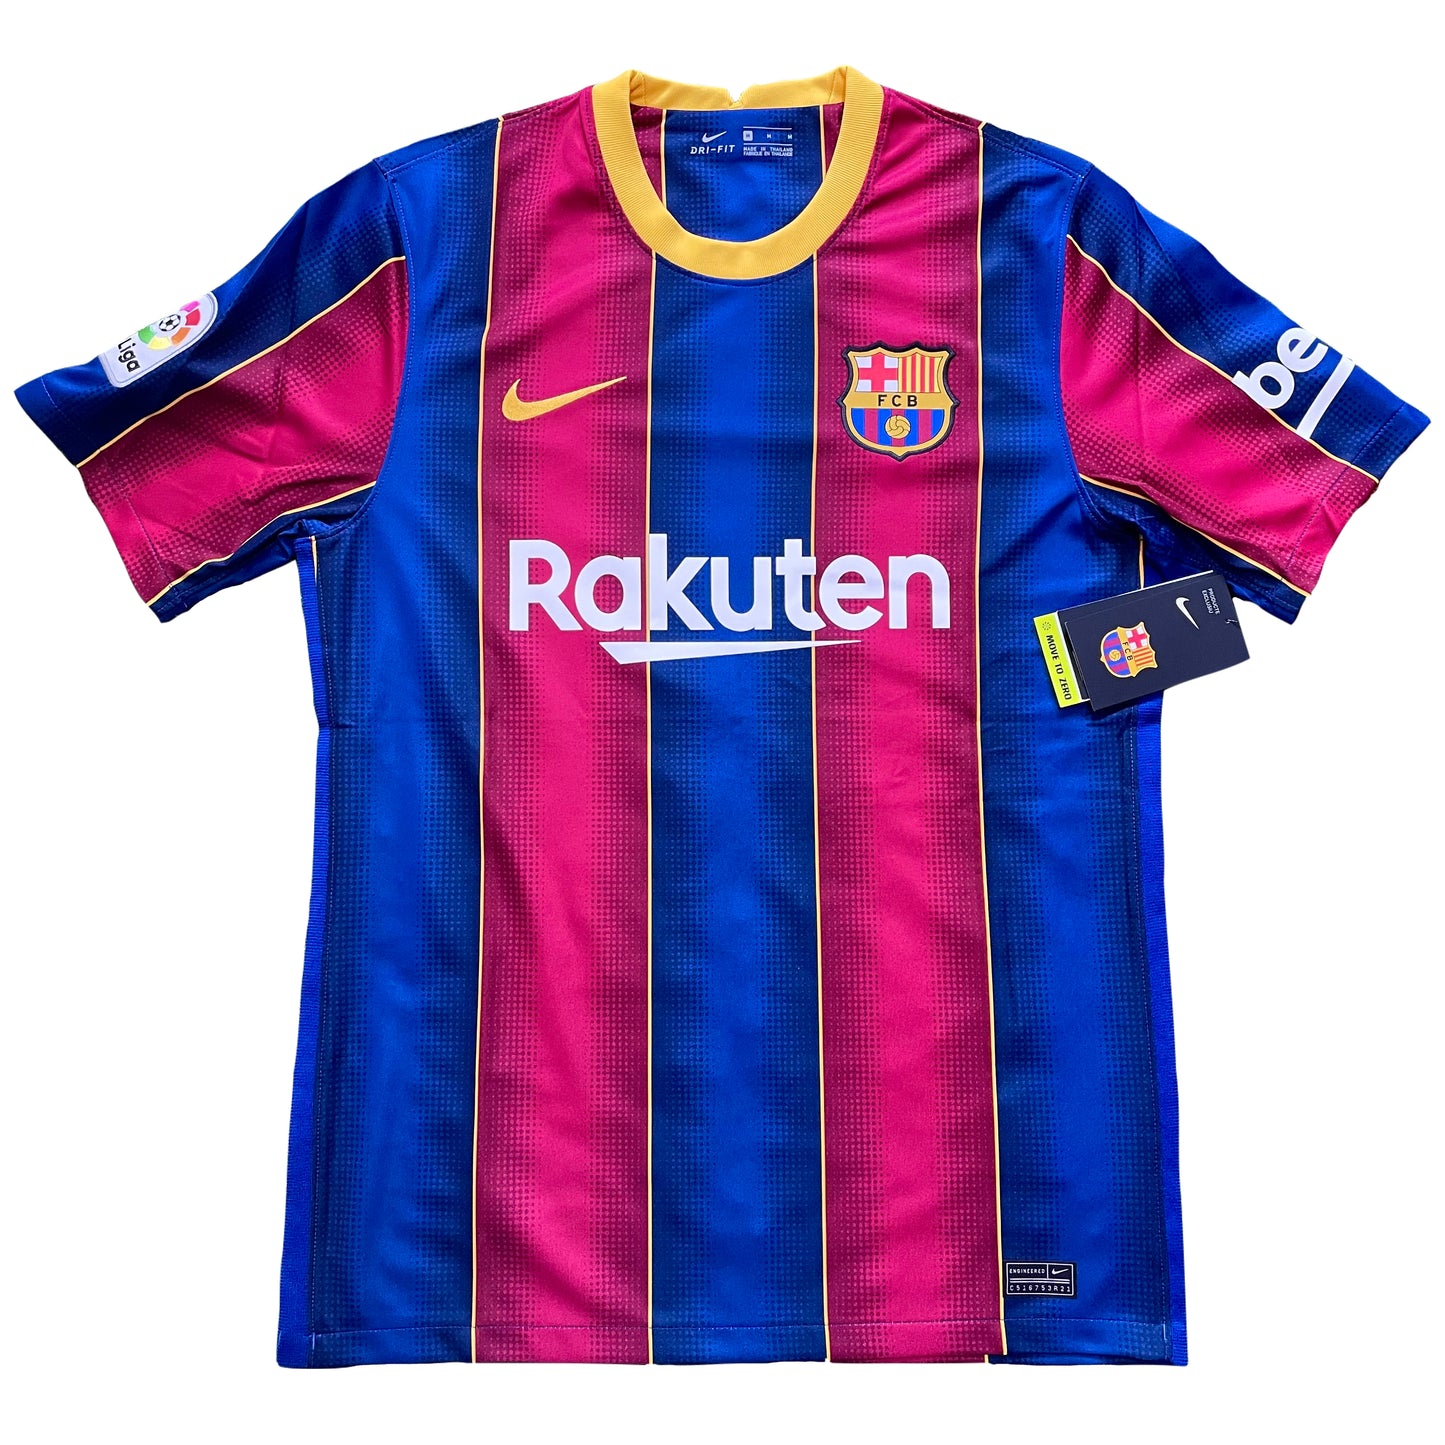 2020-2021 FC Barcelona home shirt (Youth M, Youth L, Youth XL)